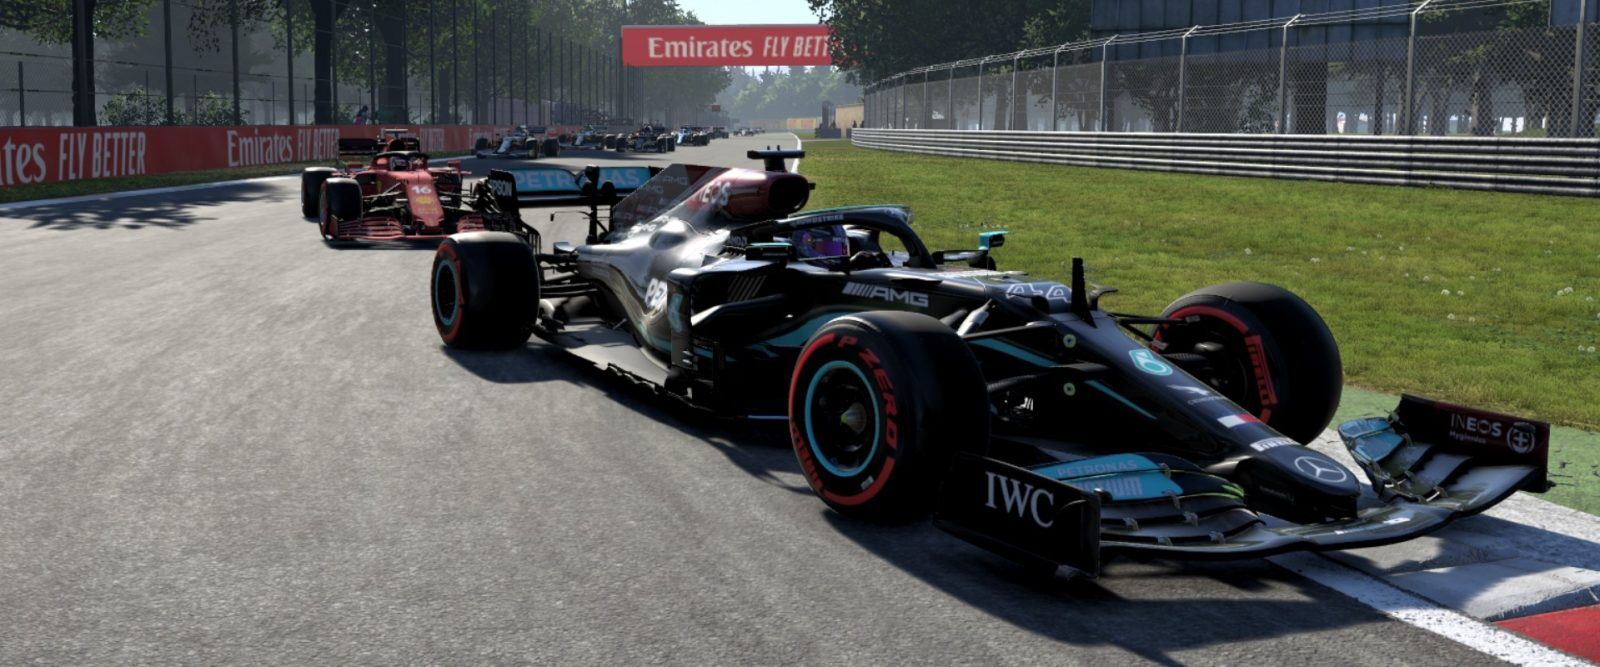 How to win a race in F1 2021 without overtaking!